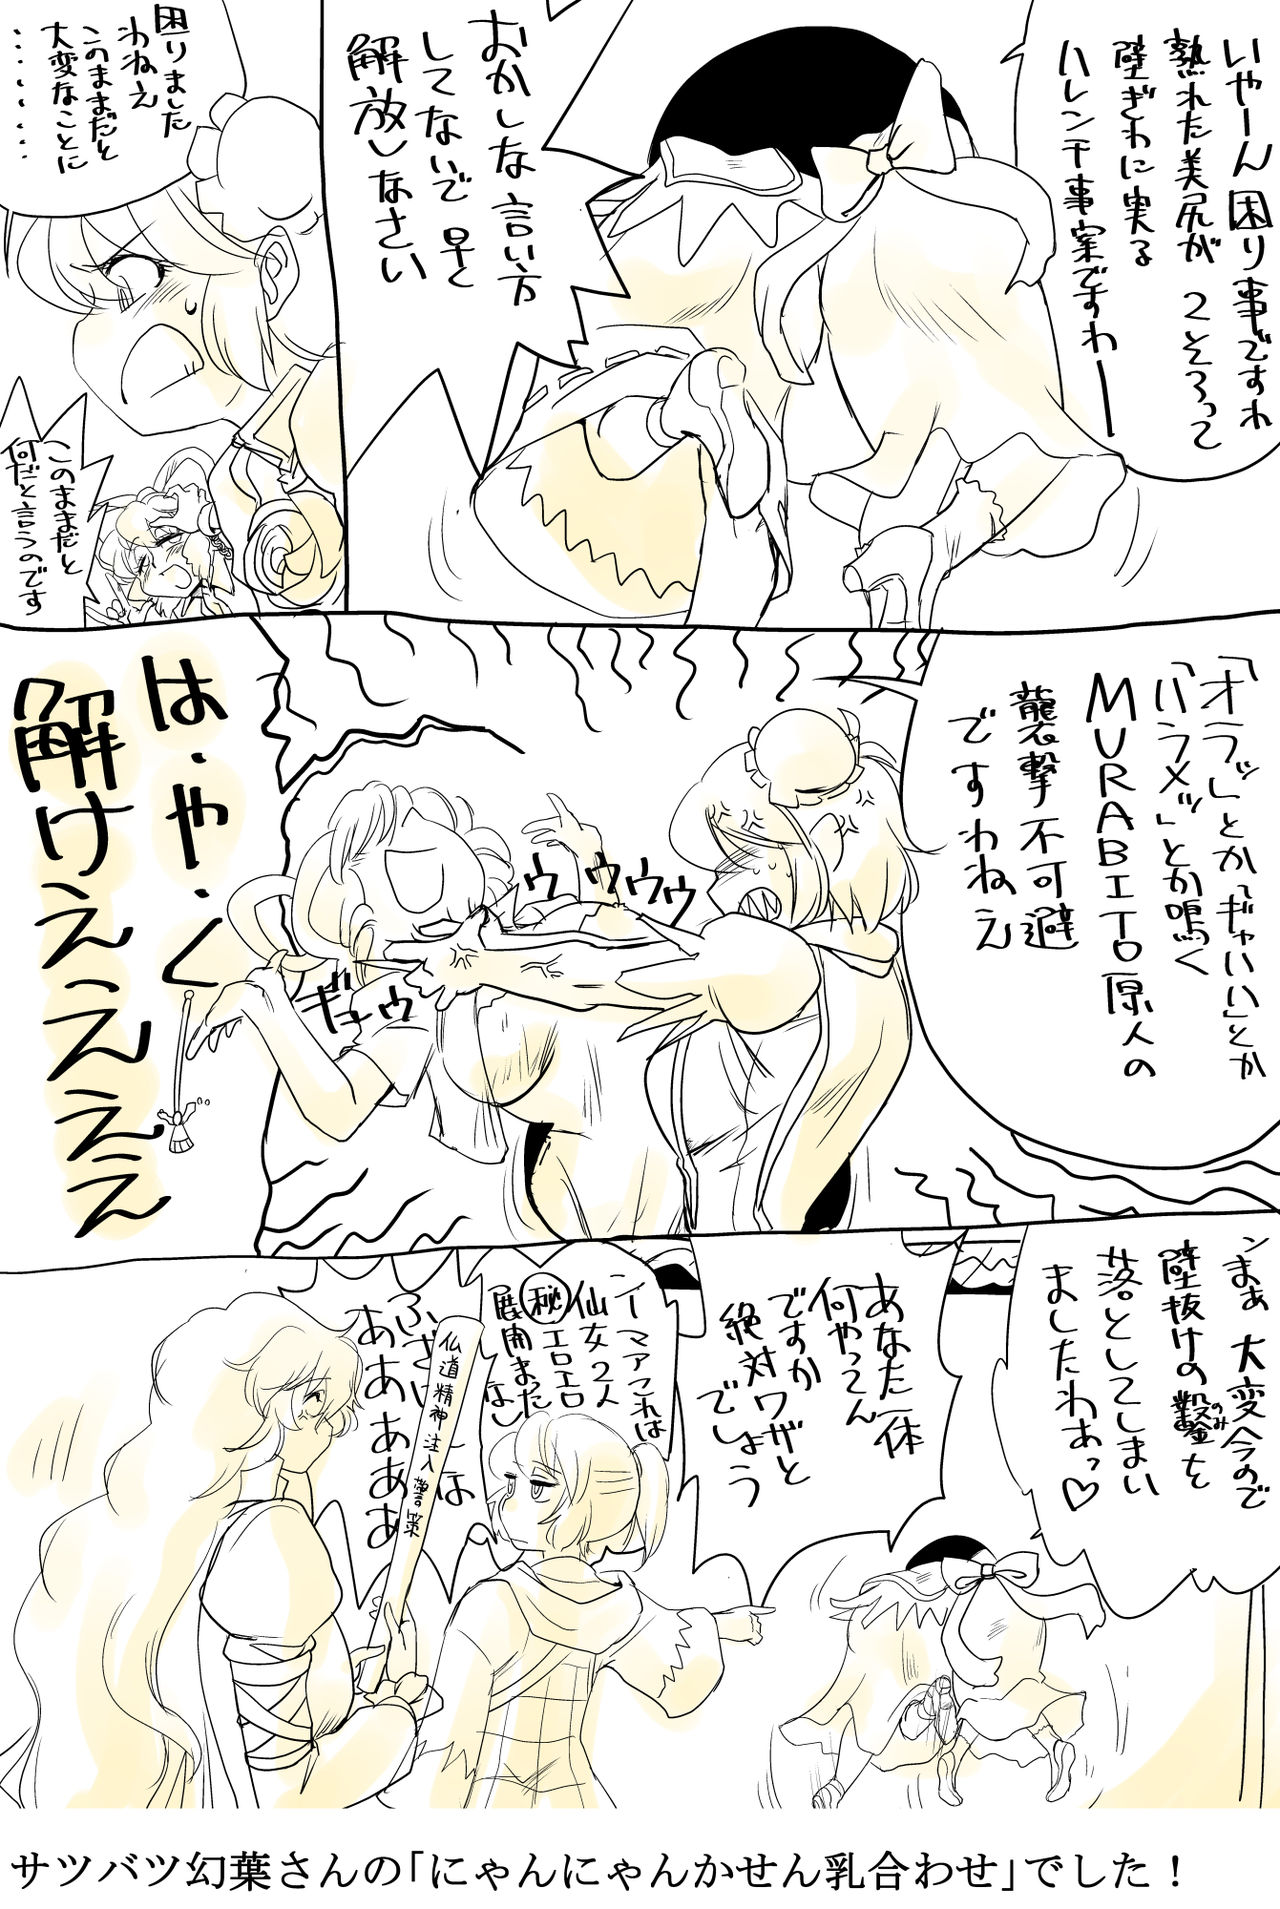 [Danna] Touhou Request CG Shuu Sono 2 (Touhou Project) page 11 full